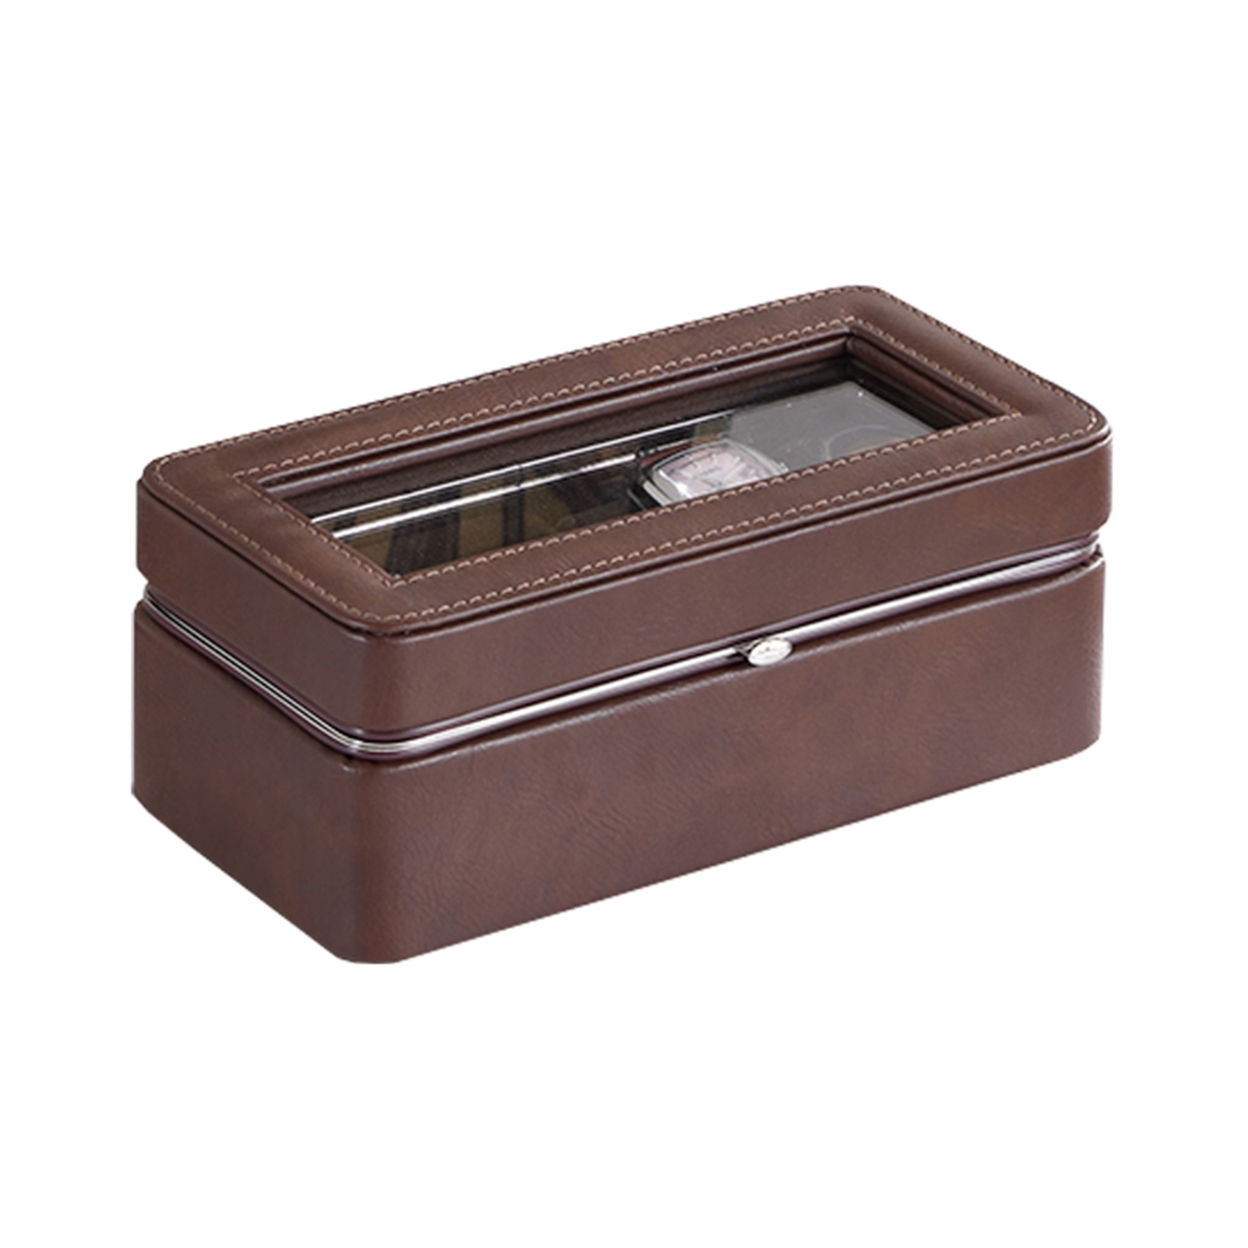 Watch Case With 4 Slots And Removable Cushions, Brown- Saltoro Sherpi